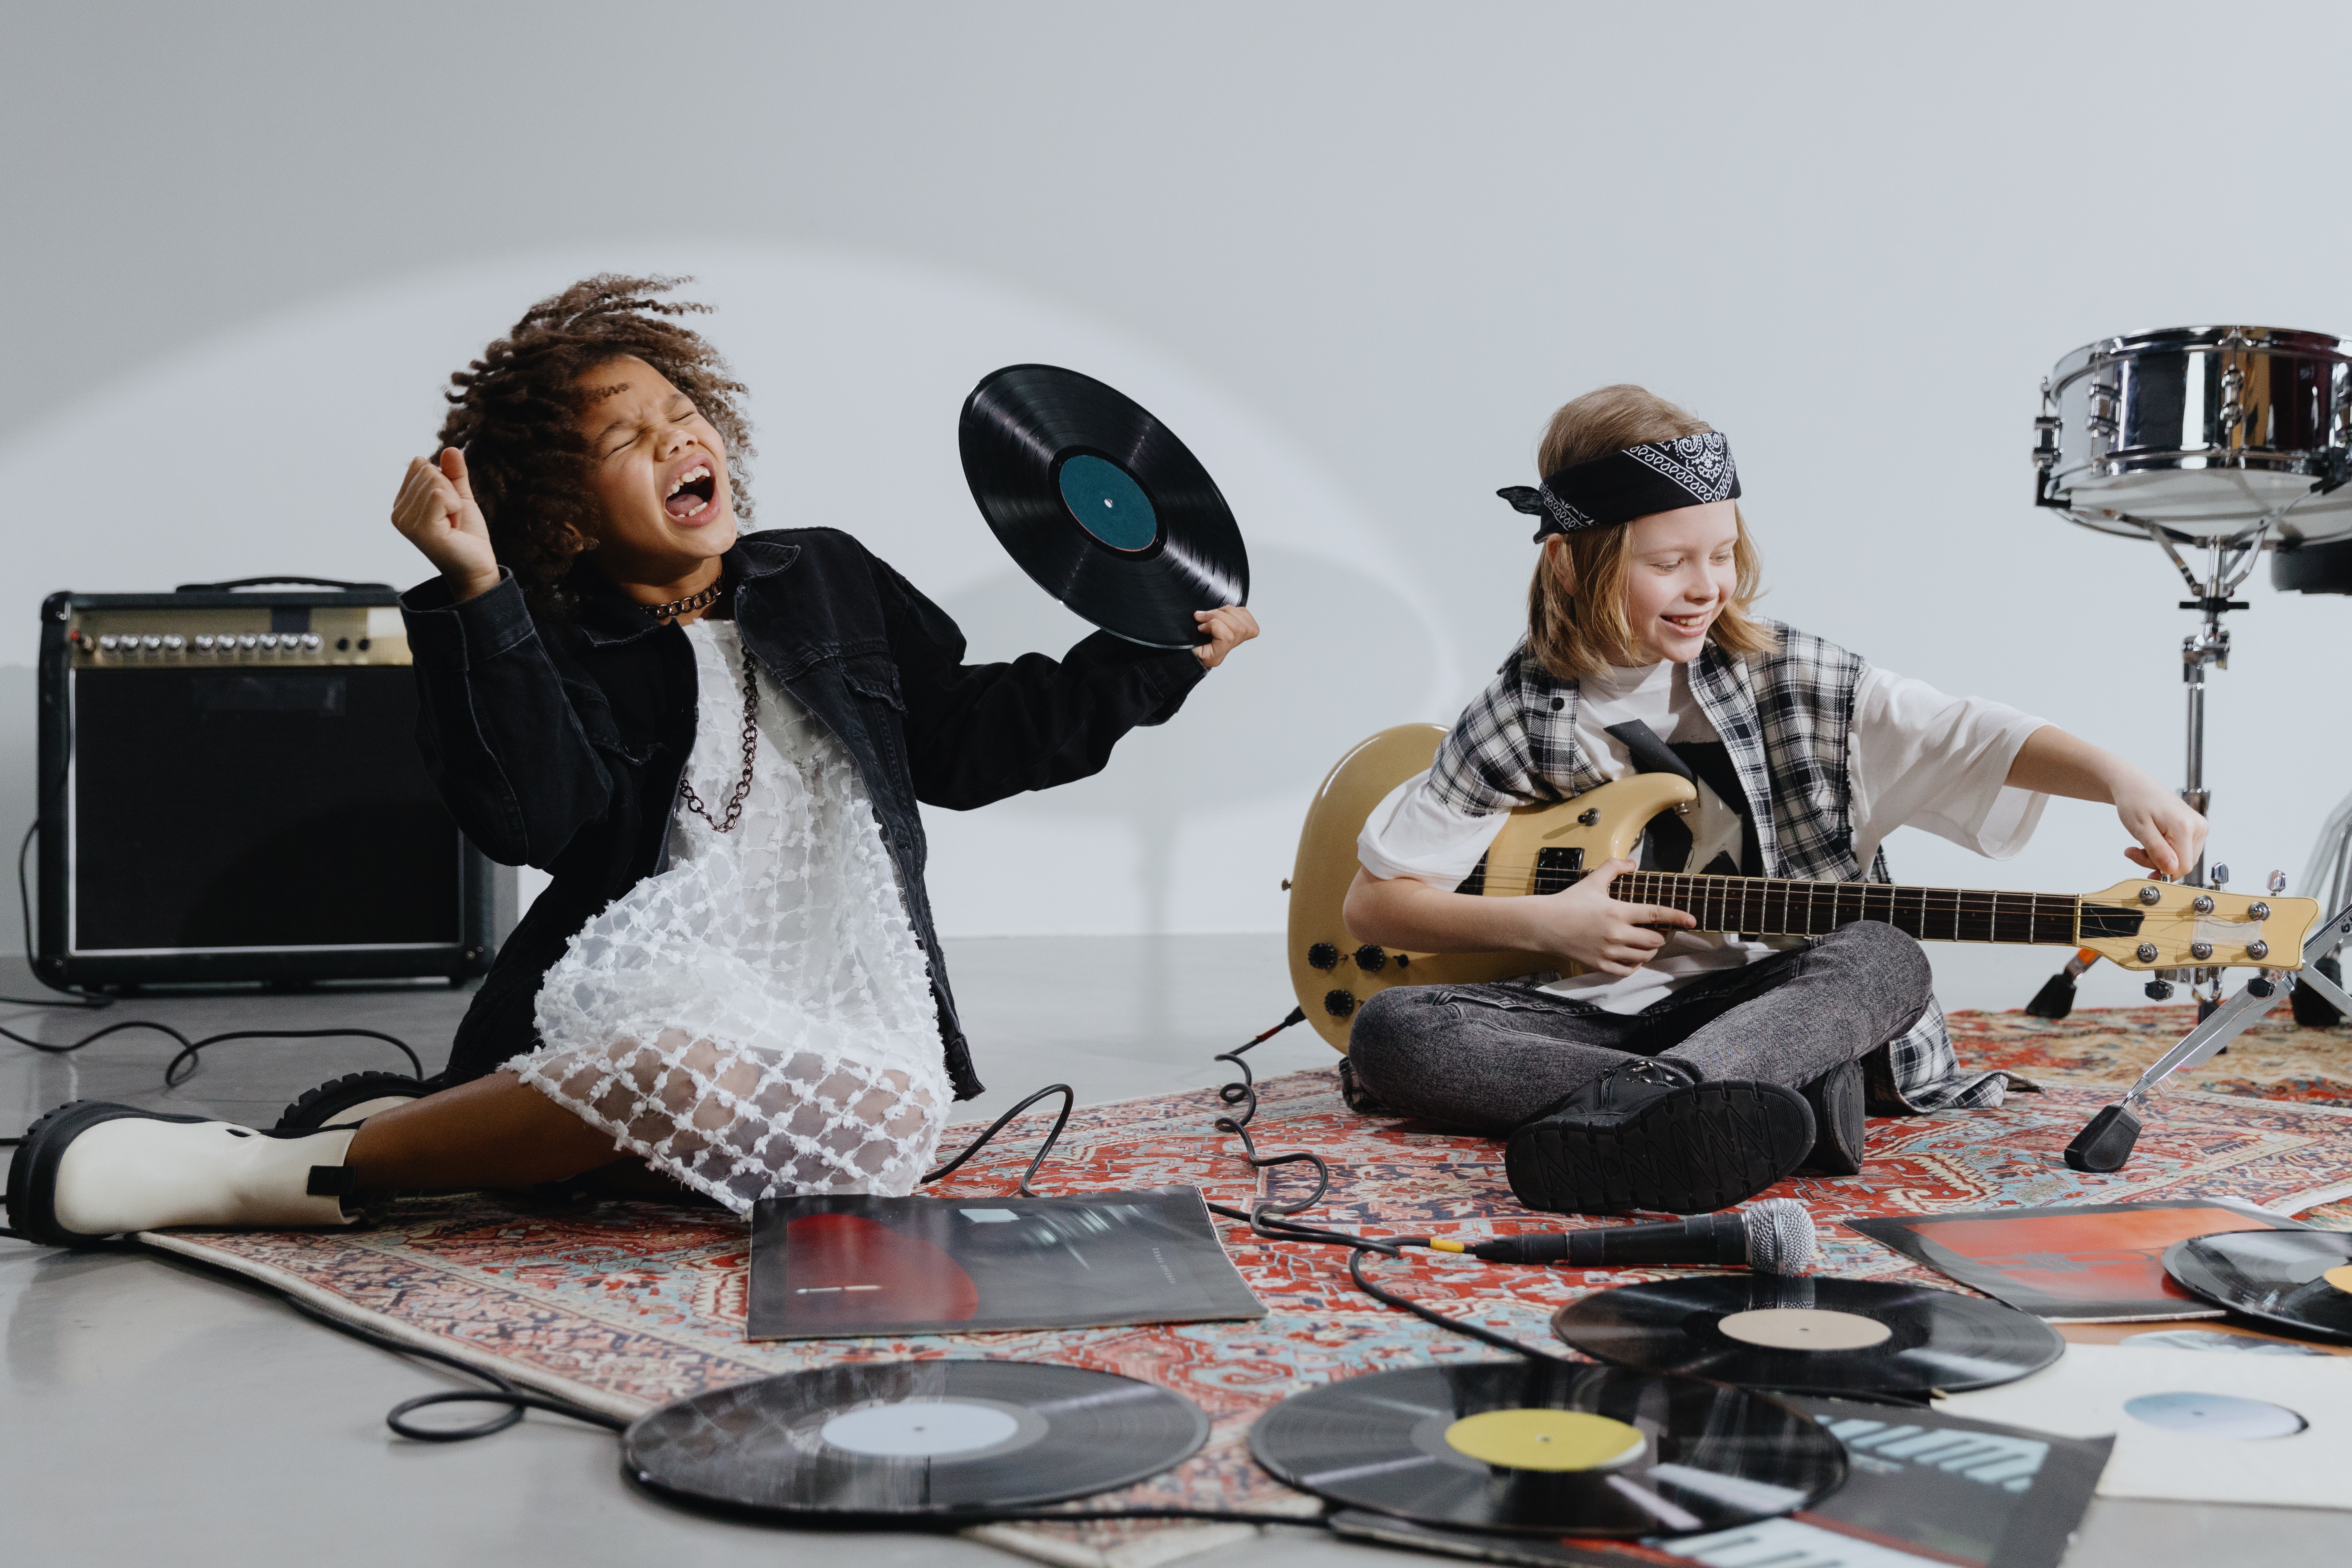 A young Black girl and young white boy sit on a rug surrounded by vinyl records. The boy is holding a guitar and the girl is holding a record and singing with her eyes squeezed shut.